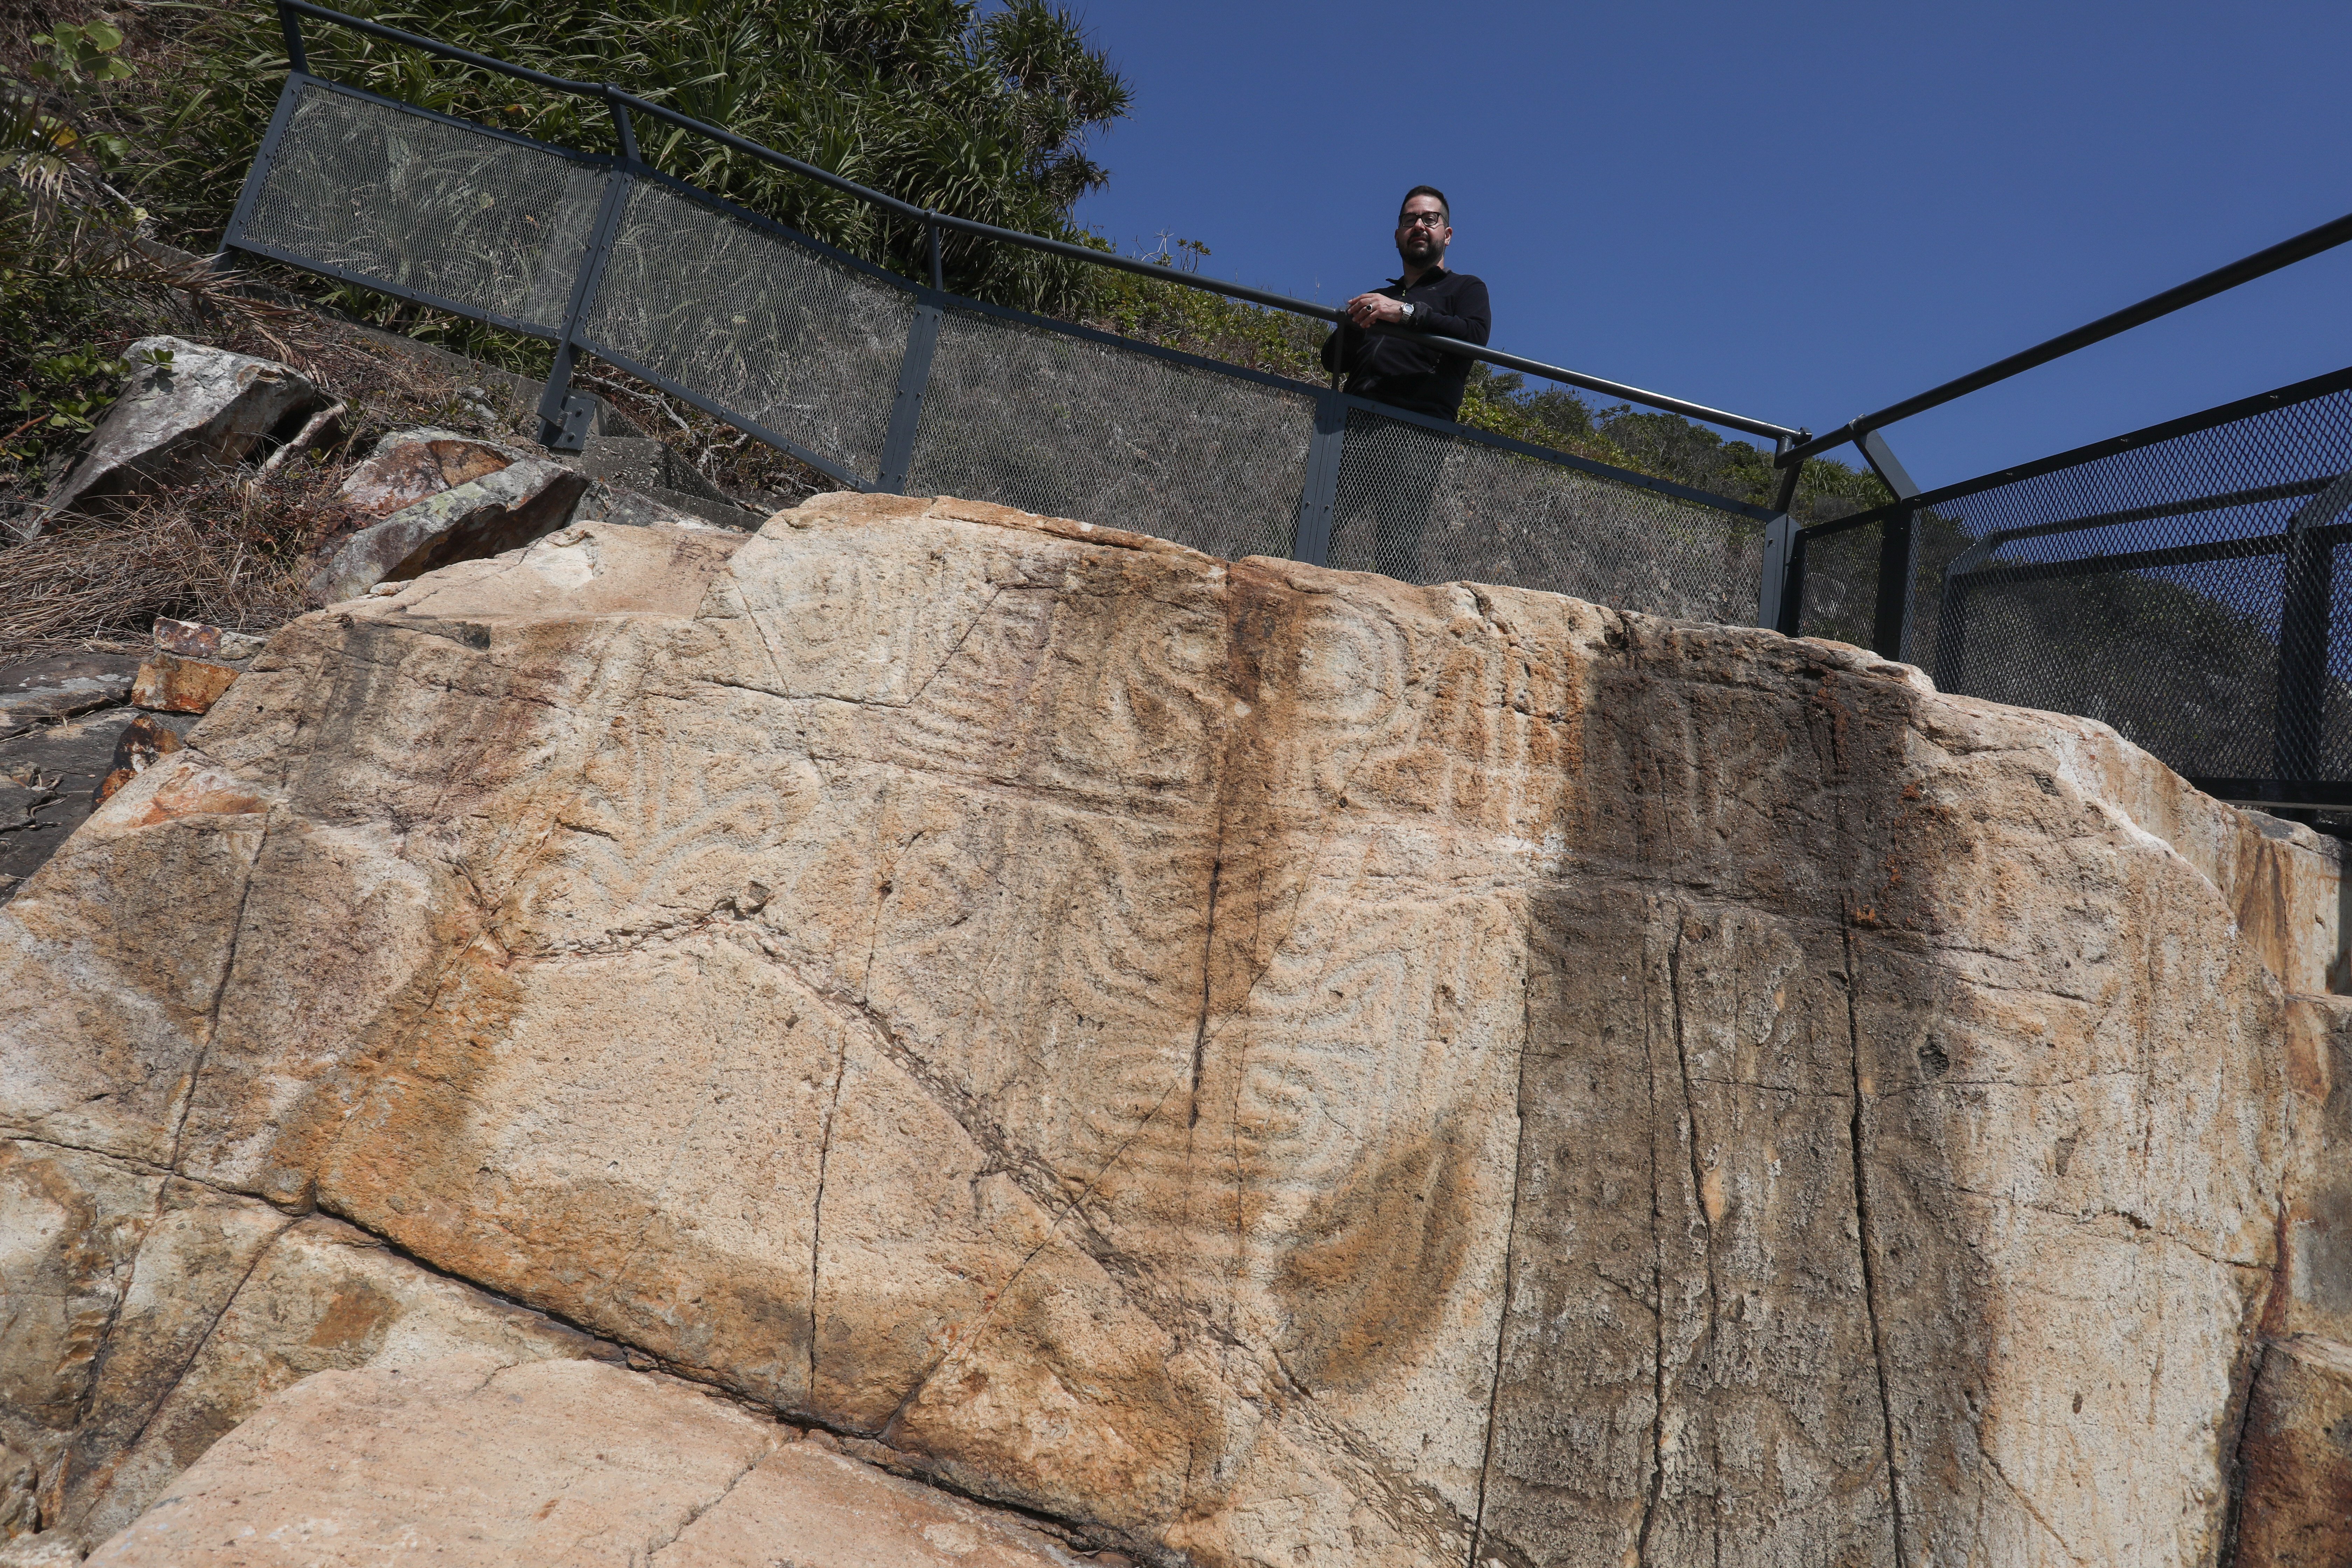 Marc Rubinstein with rock carvings in Big Wave Bay, Hong Kong Island, on February 03, 2021.  Rubinstein has spent 2020 searching for ancient rock carvings in Hong Kong and discovered this city’s rich history stretches way before it was ceded to Britain in 1842. 03FEB21 [FEATURES]  SCMP / Jonathan Wong